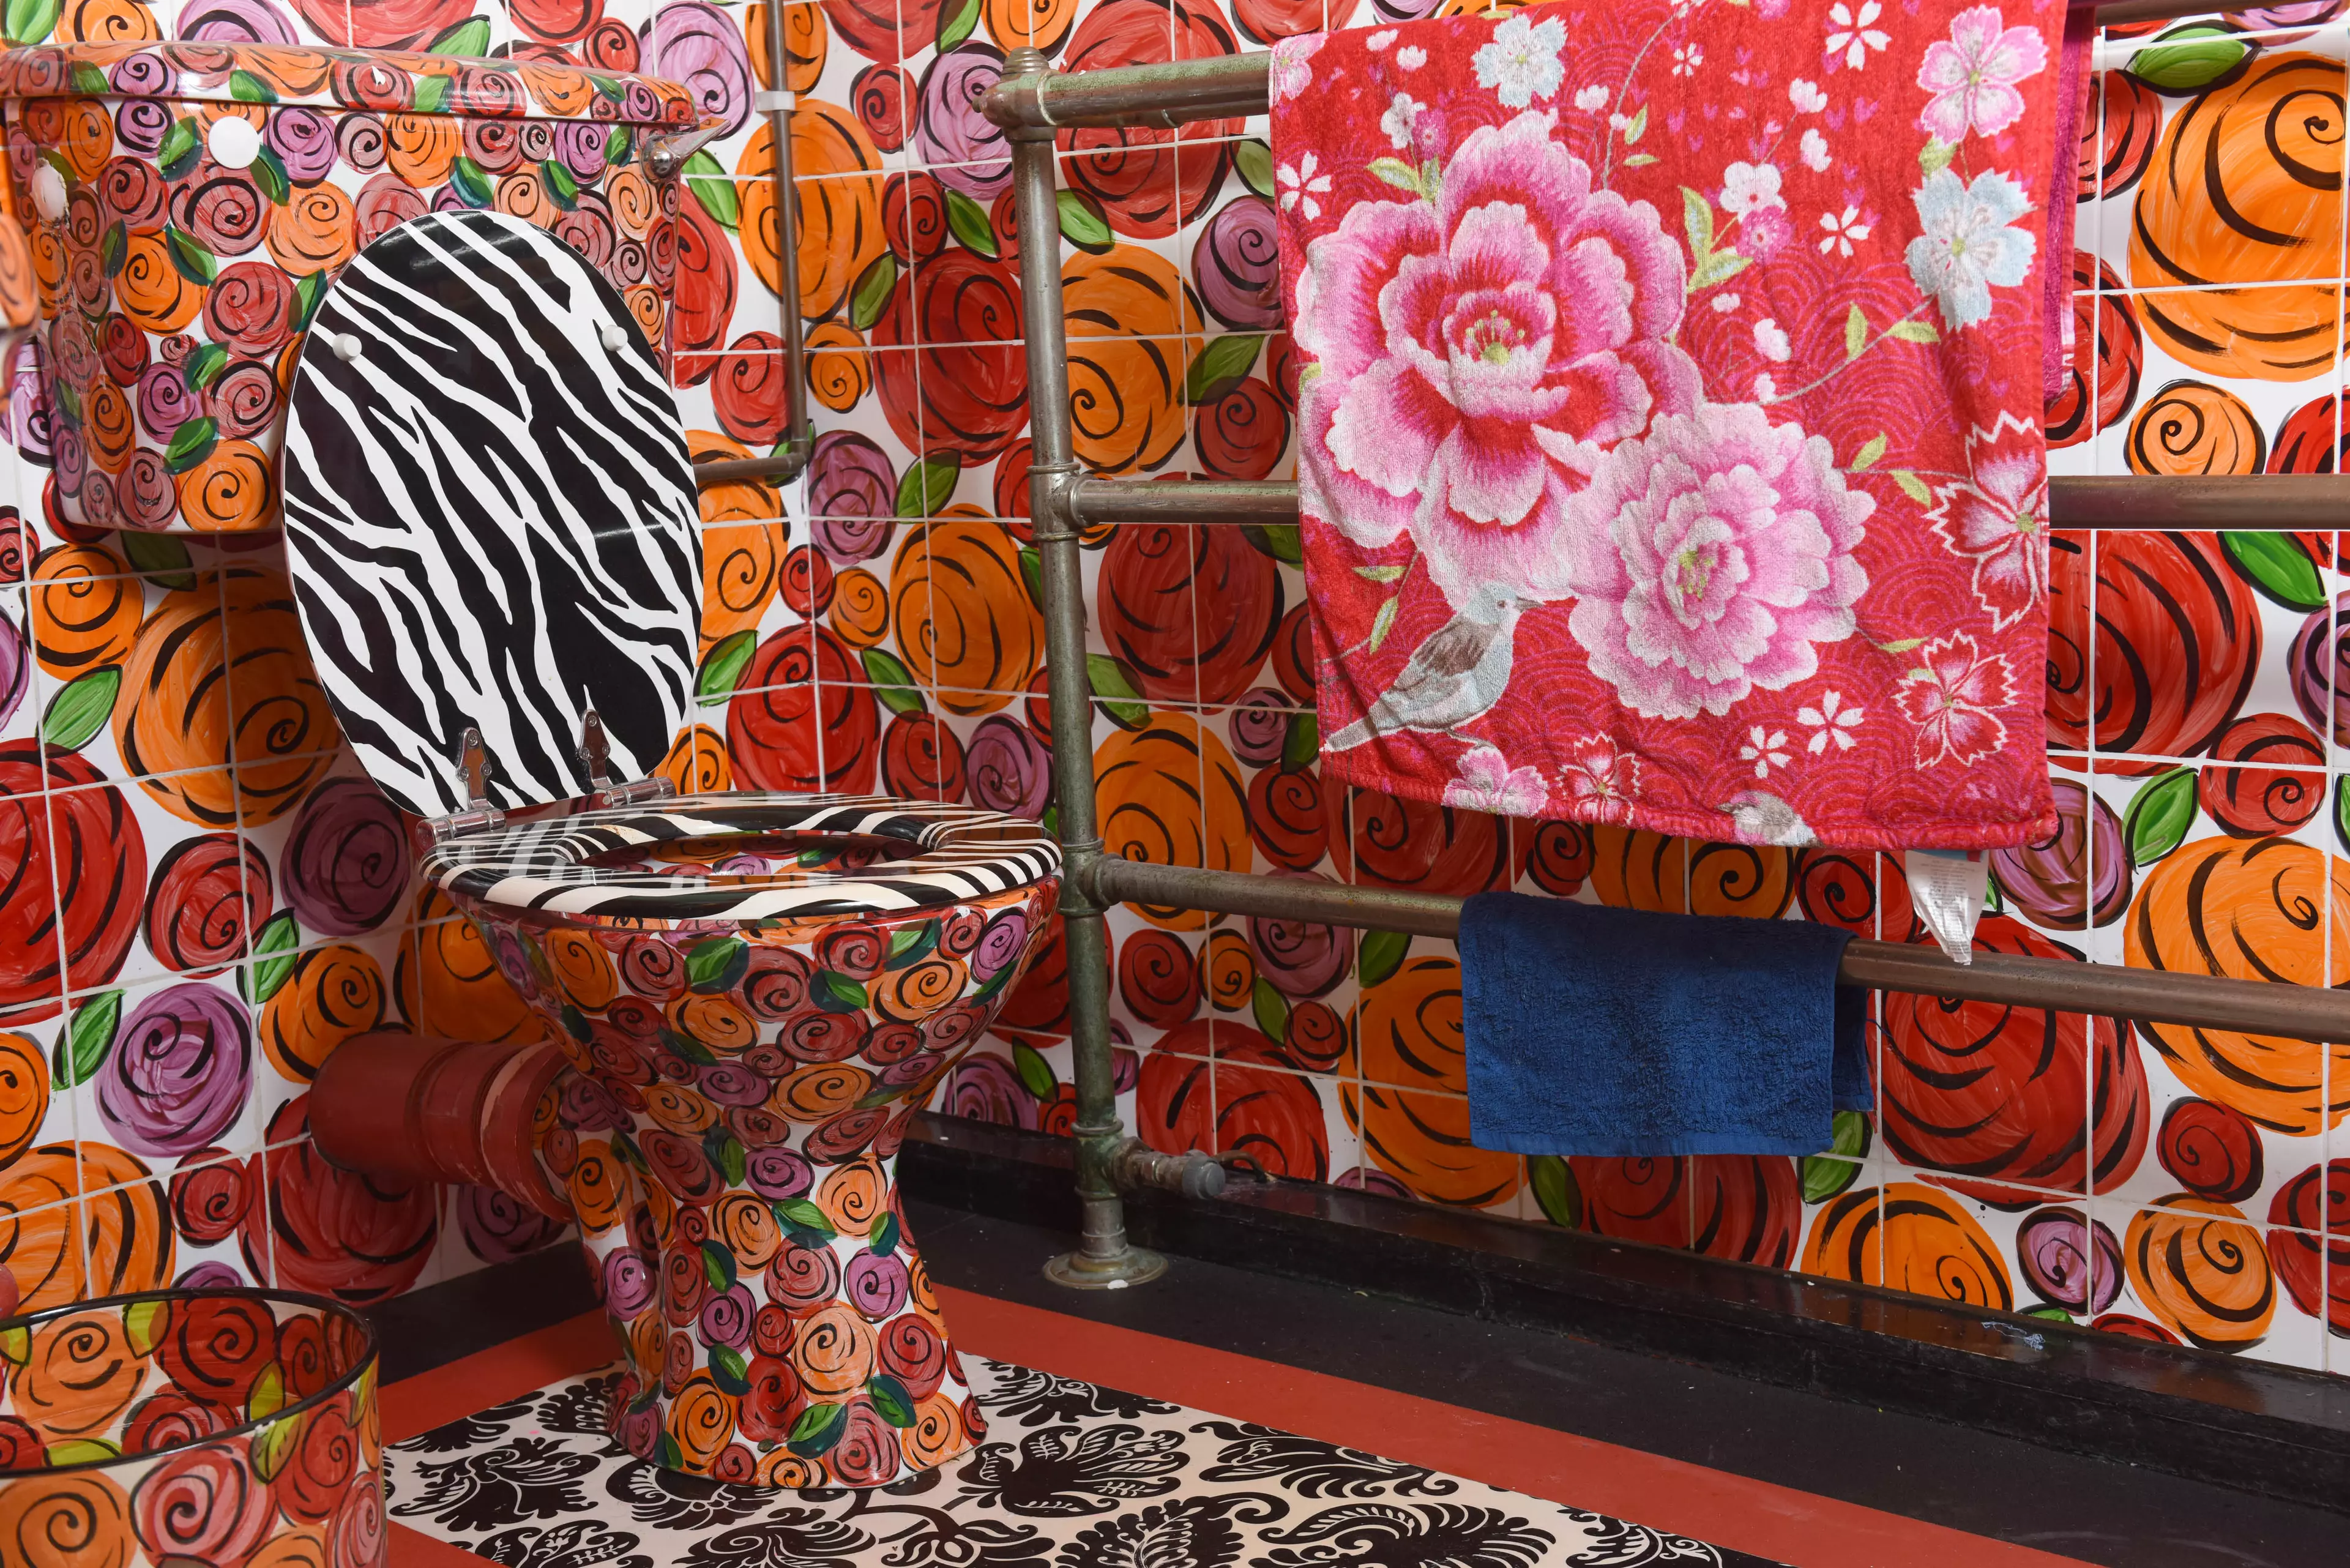 We're a little bit obsessed with this loo (